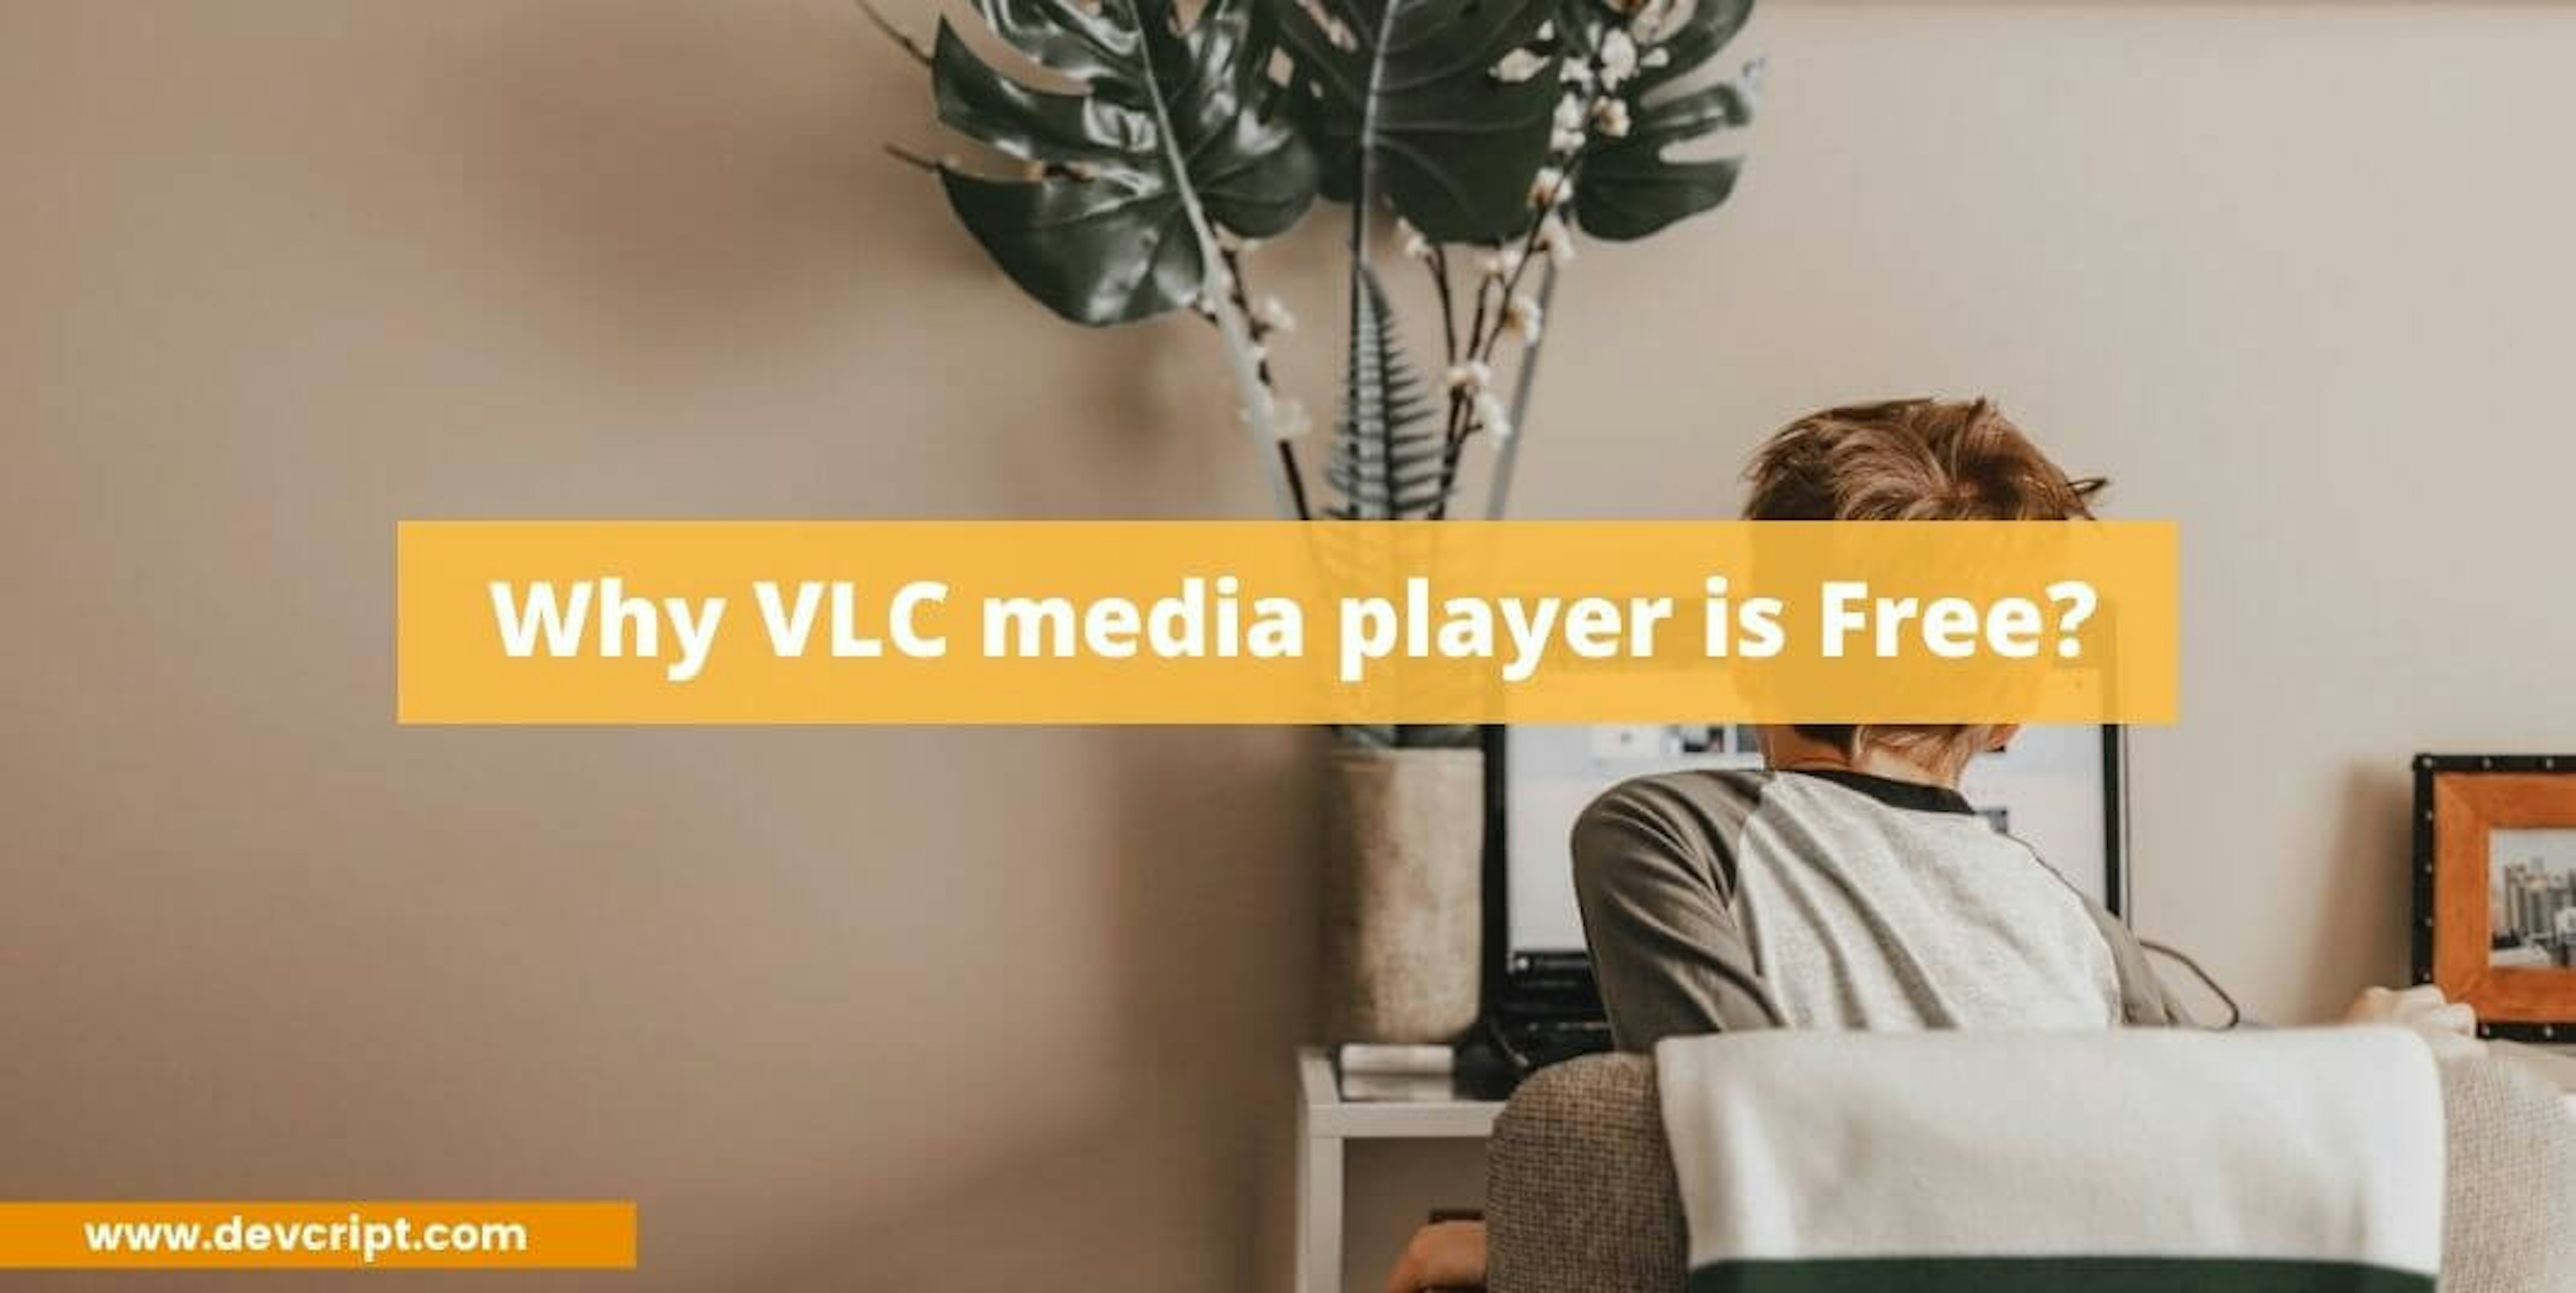 Why VLC media player is Free?